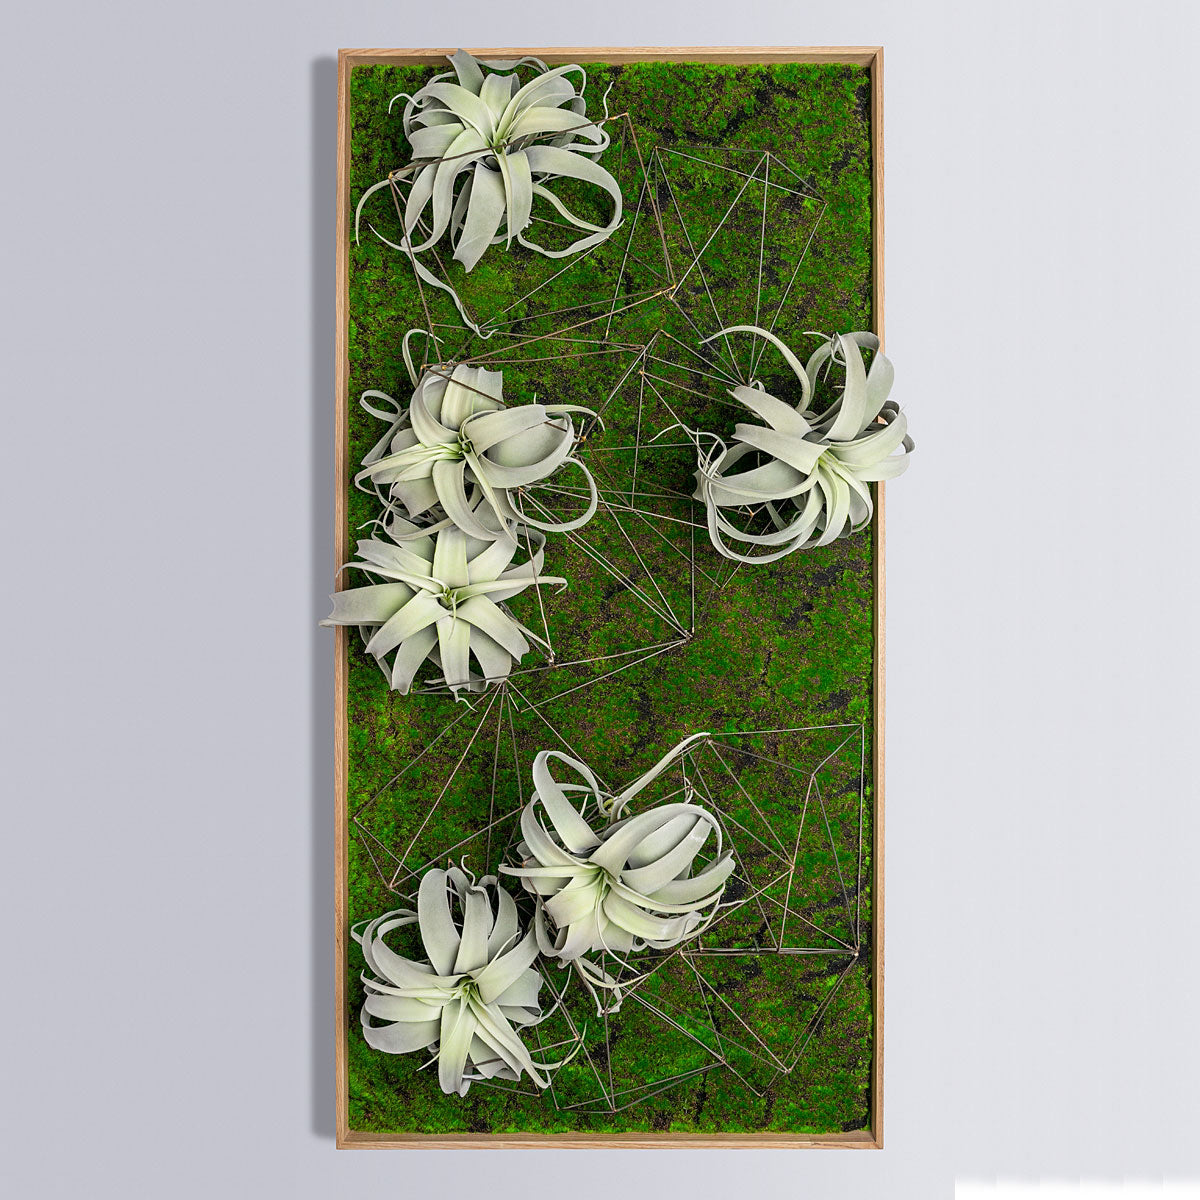 Green Wall, Wire Crystals & Xerographica